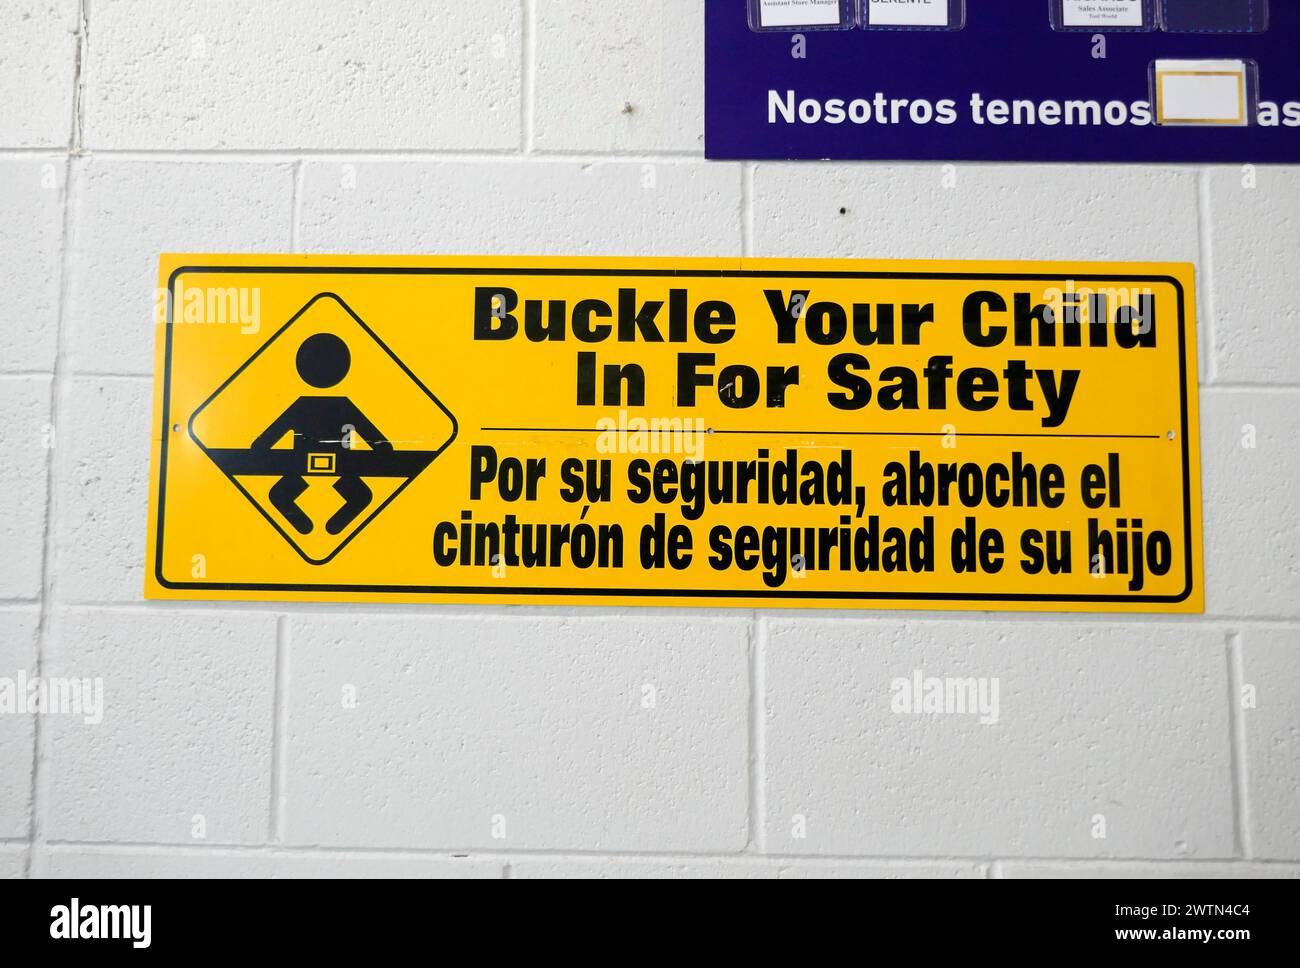 Sign warning parents to safely secure their children in a shopping cart. English and Spanish. Stock Photo